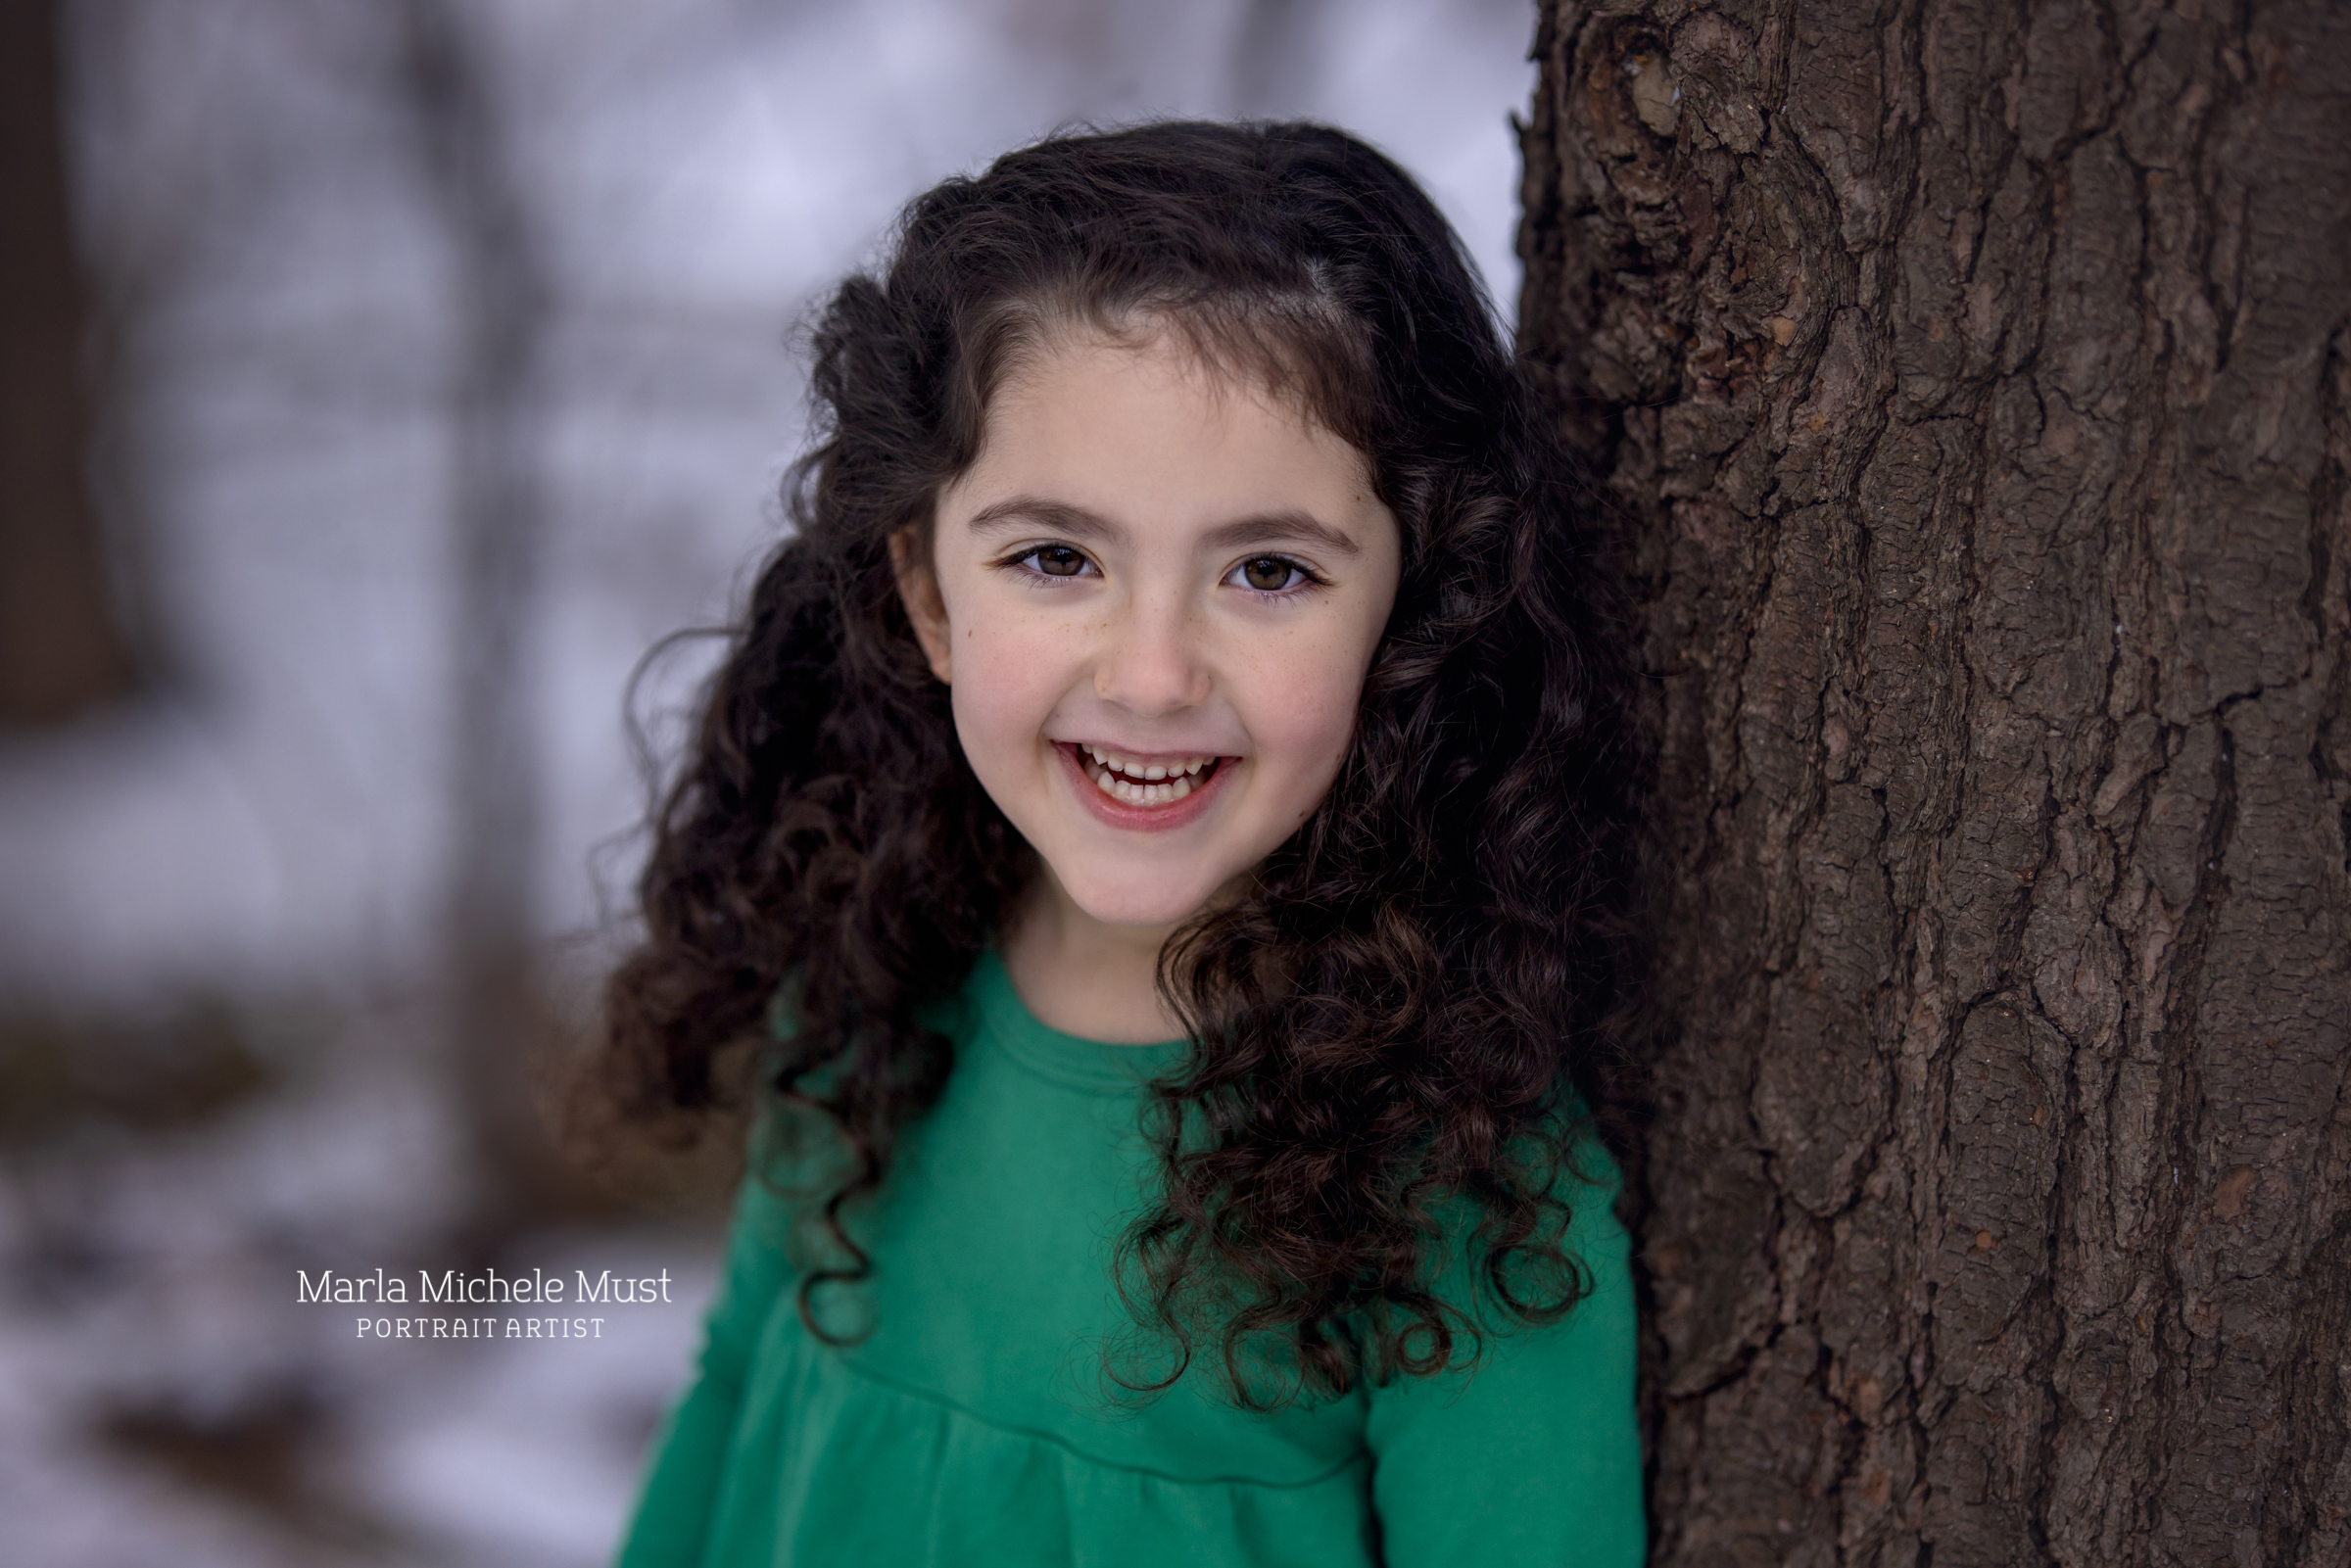 A young girl poses for a family portrait in Detroit. She stands against a snow outdoor background and smiles to the camera. She has brown, curly hair and is wearing a green shirt.